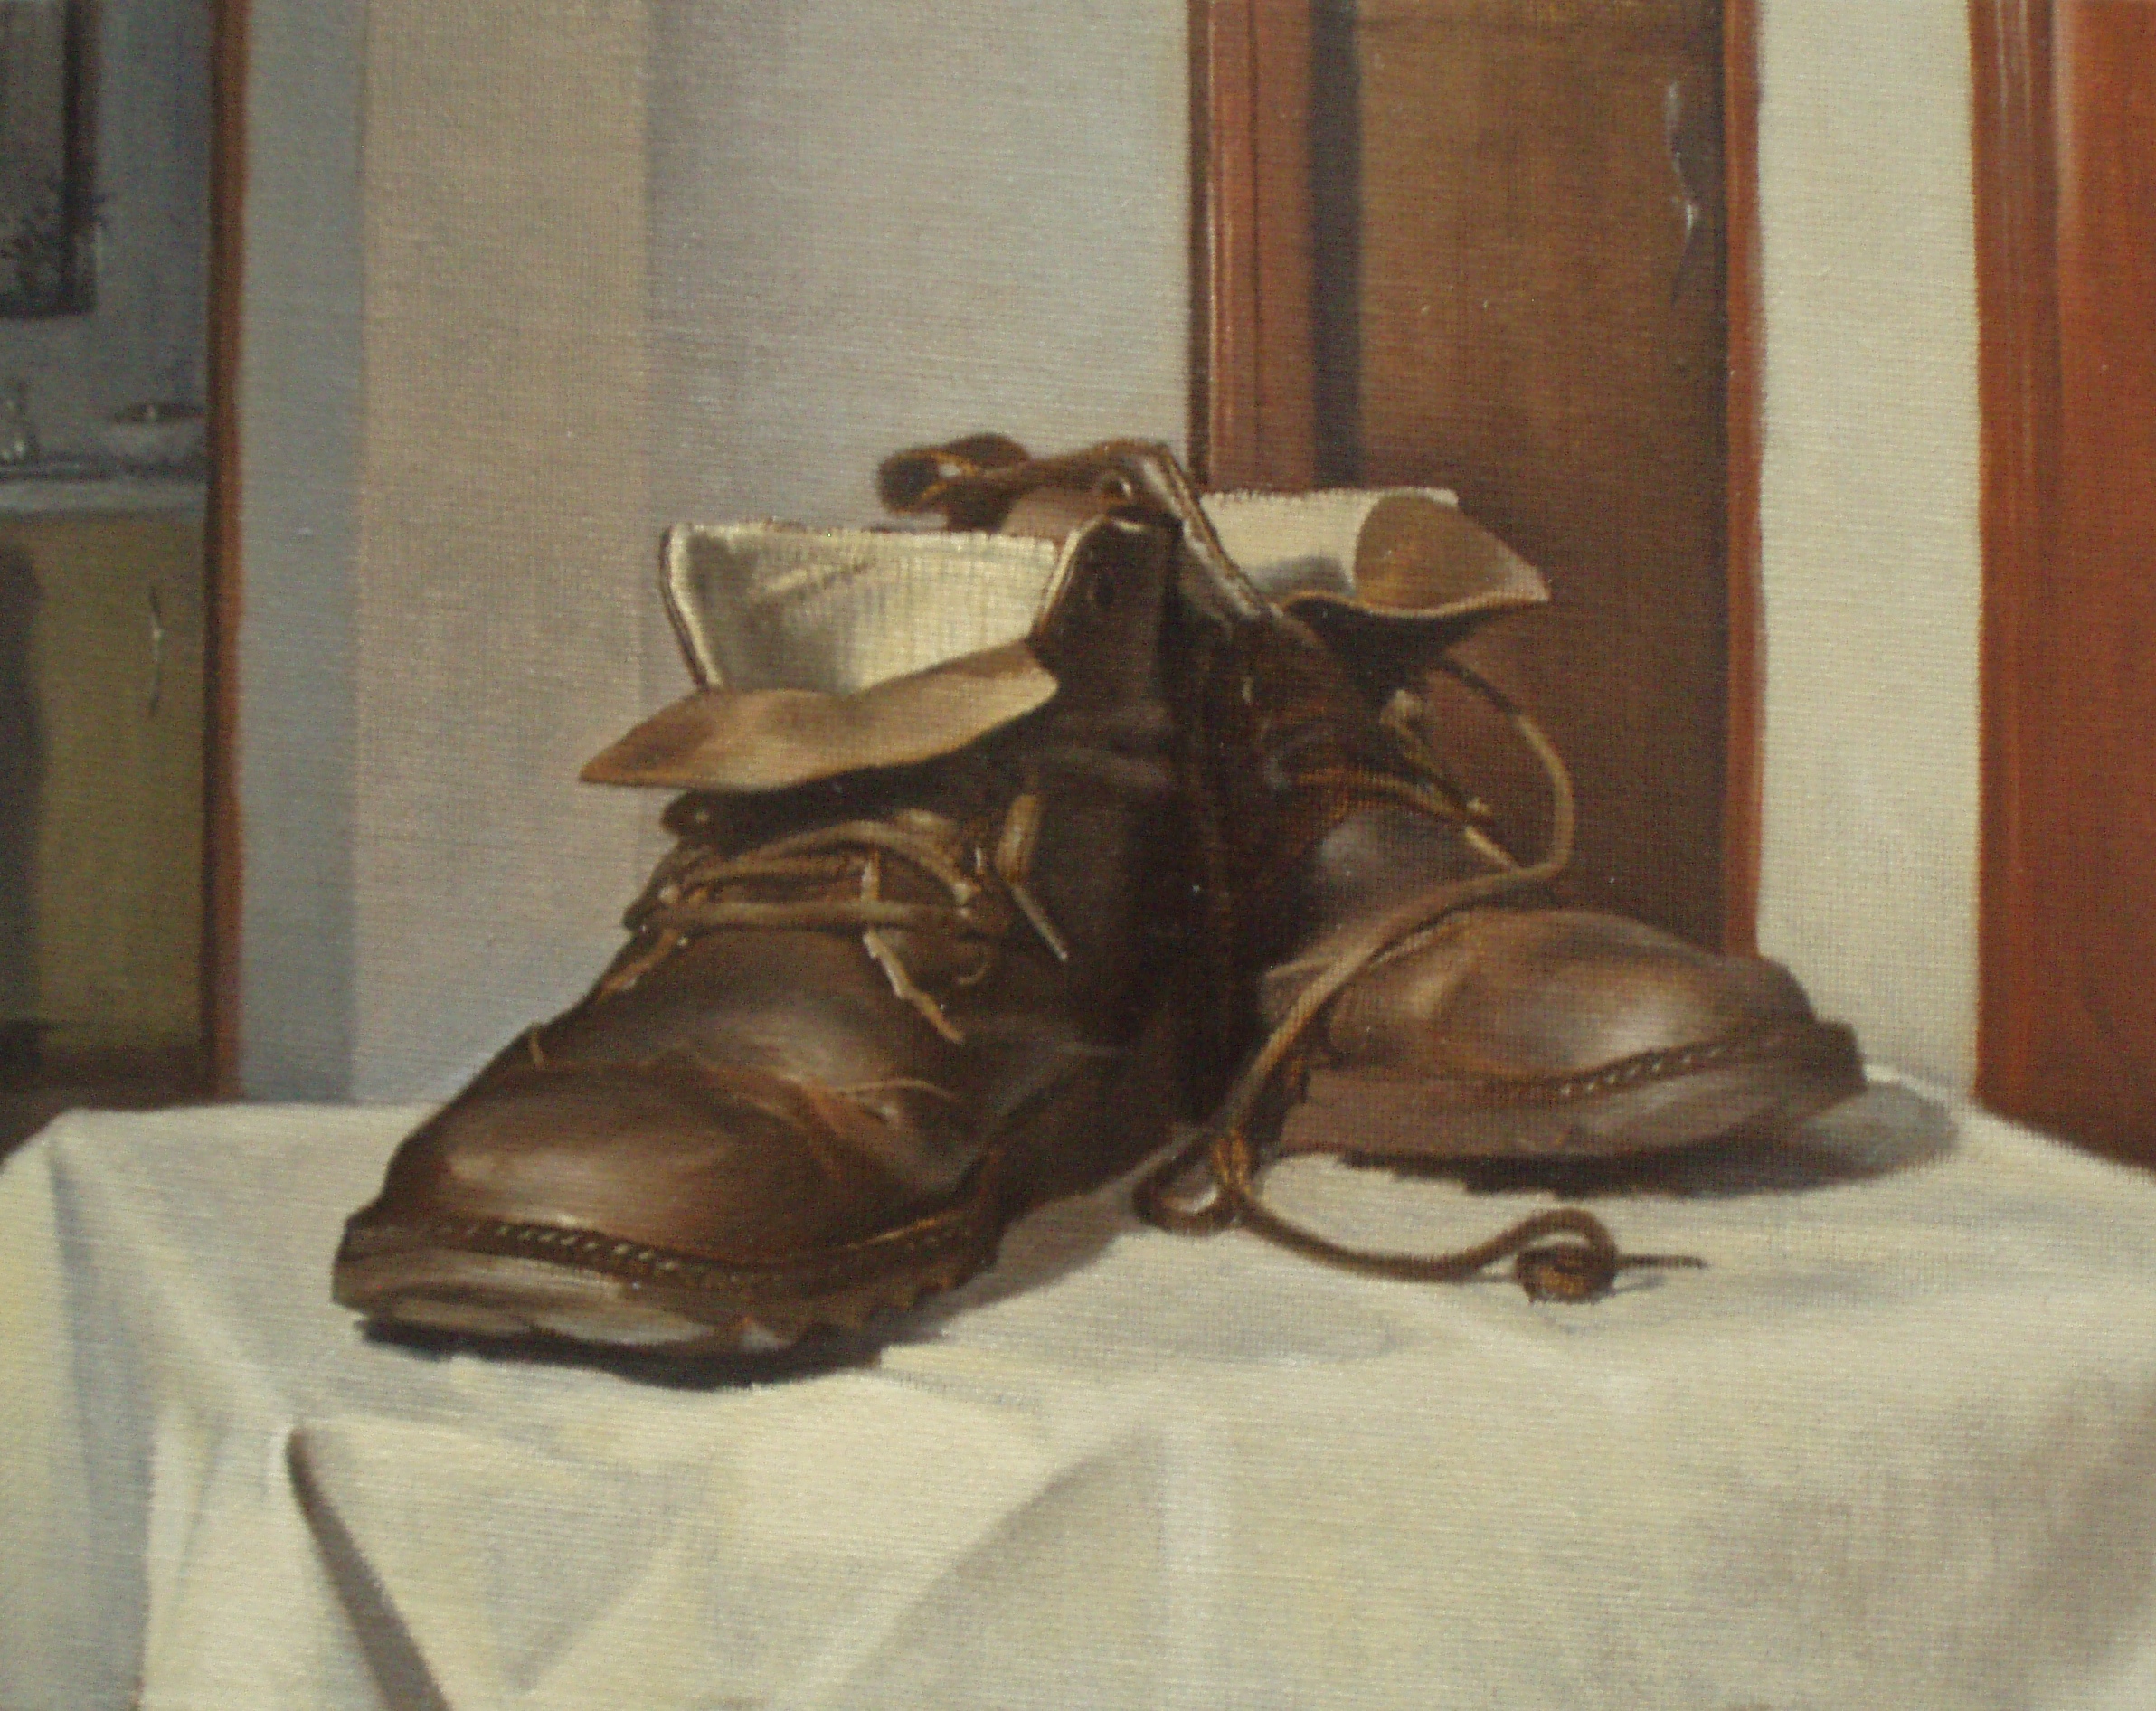 24,Pair of Shoes,2008,20